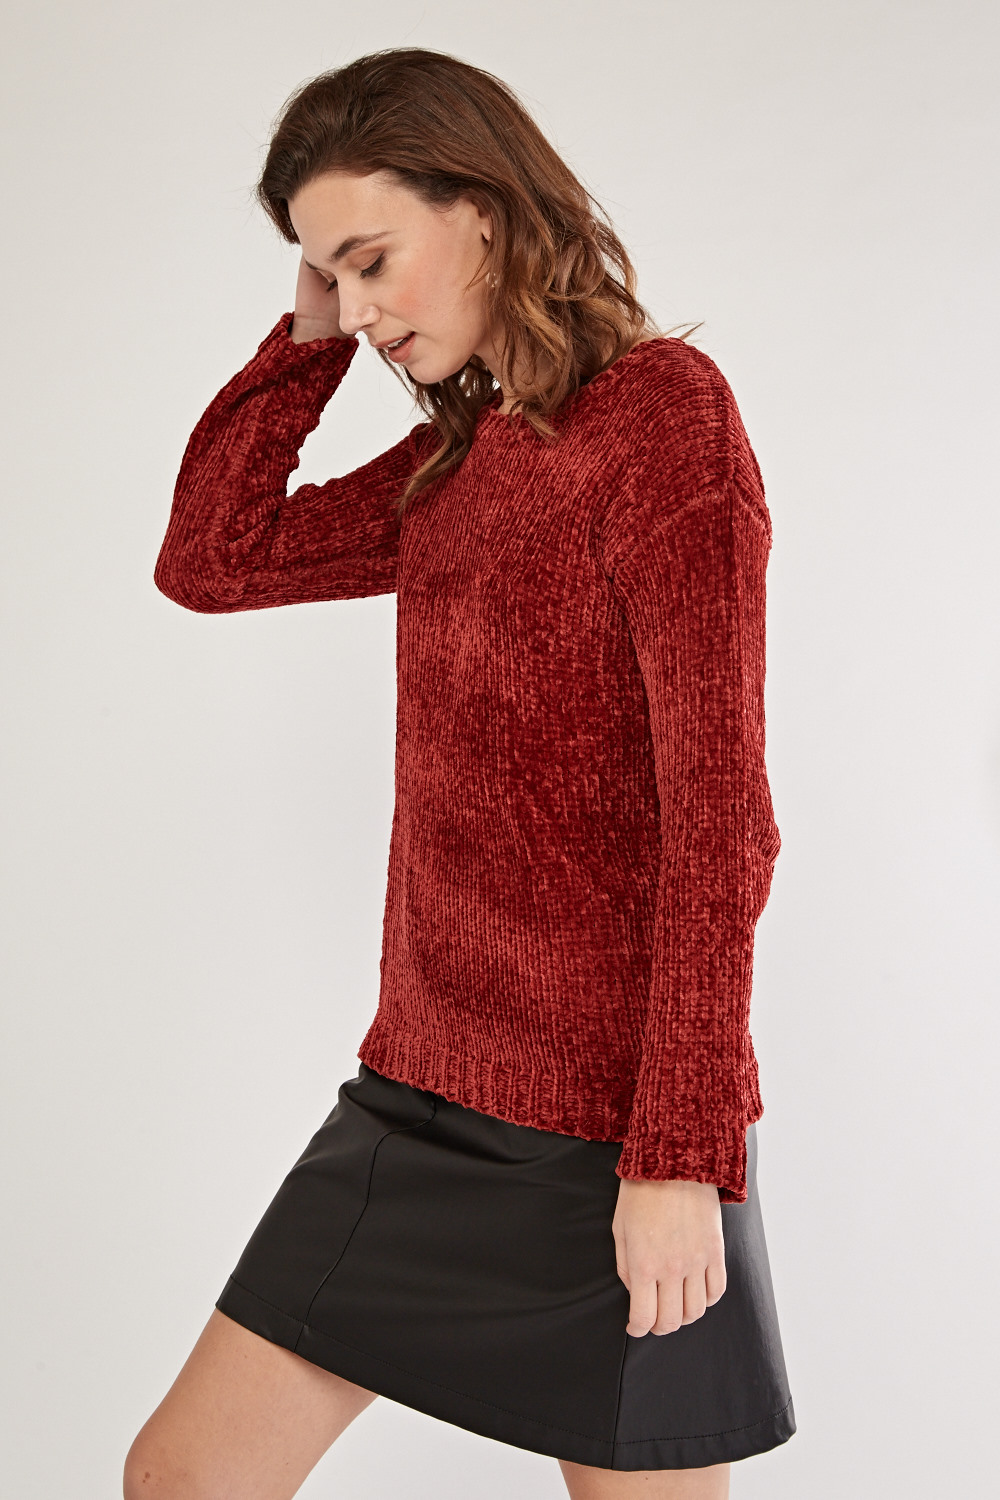 Download Crew Neck Red Chenille Knit Jumper - Just $7